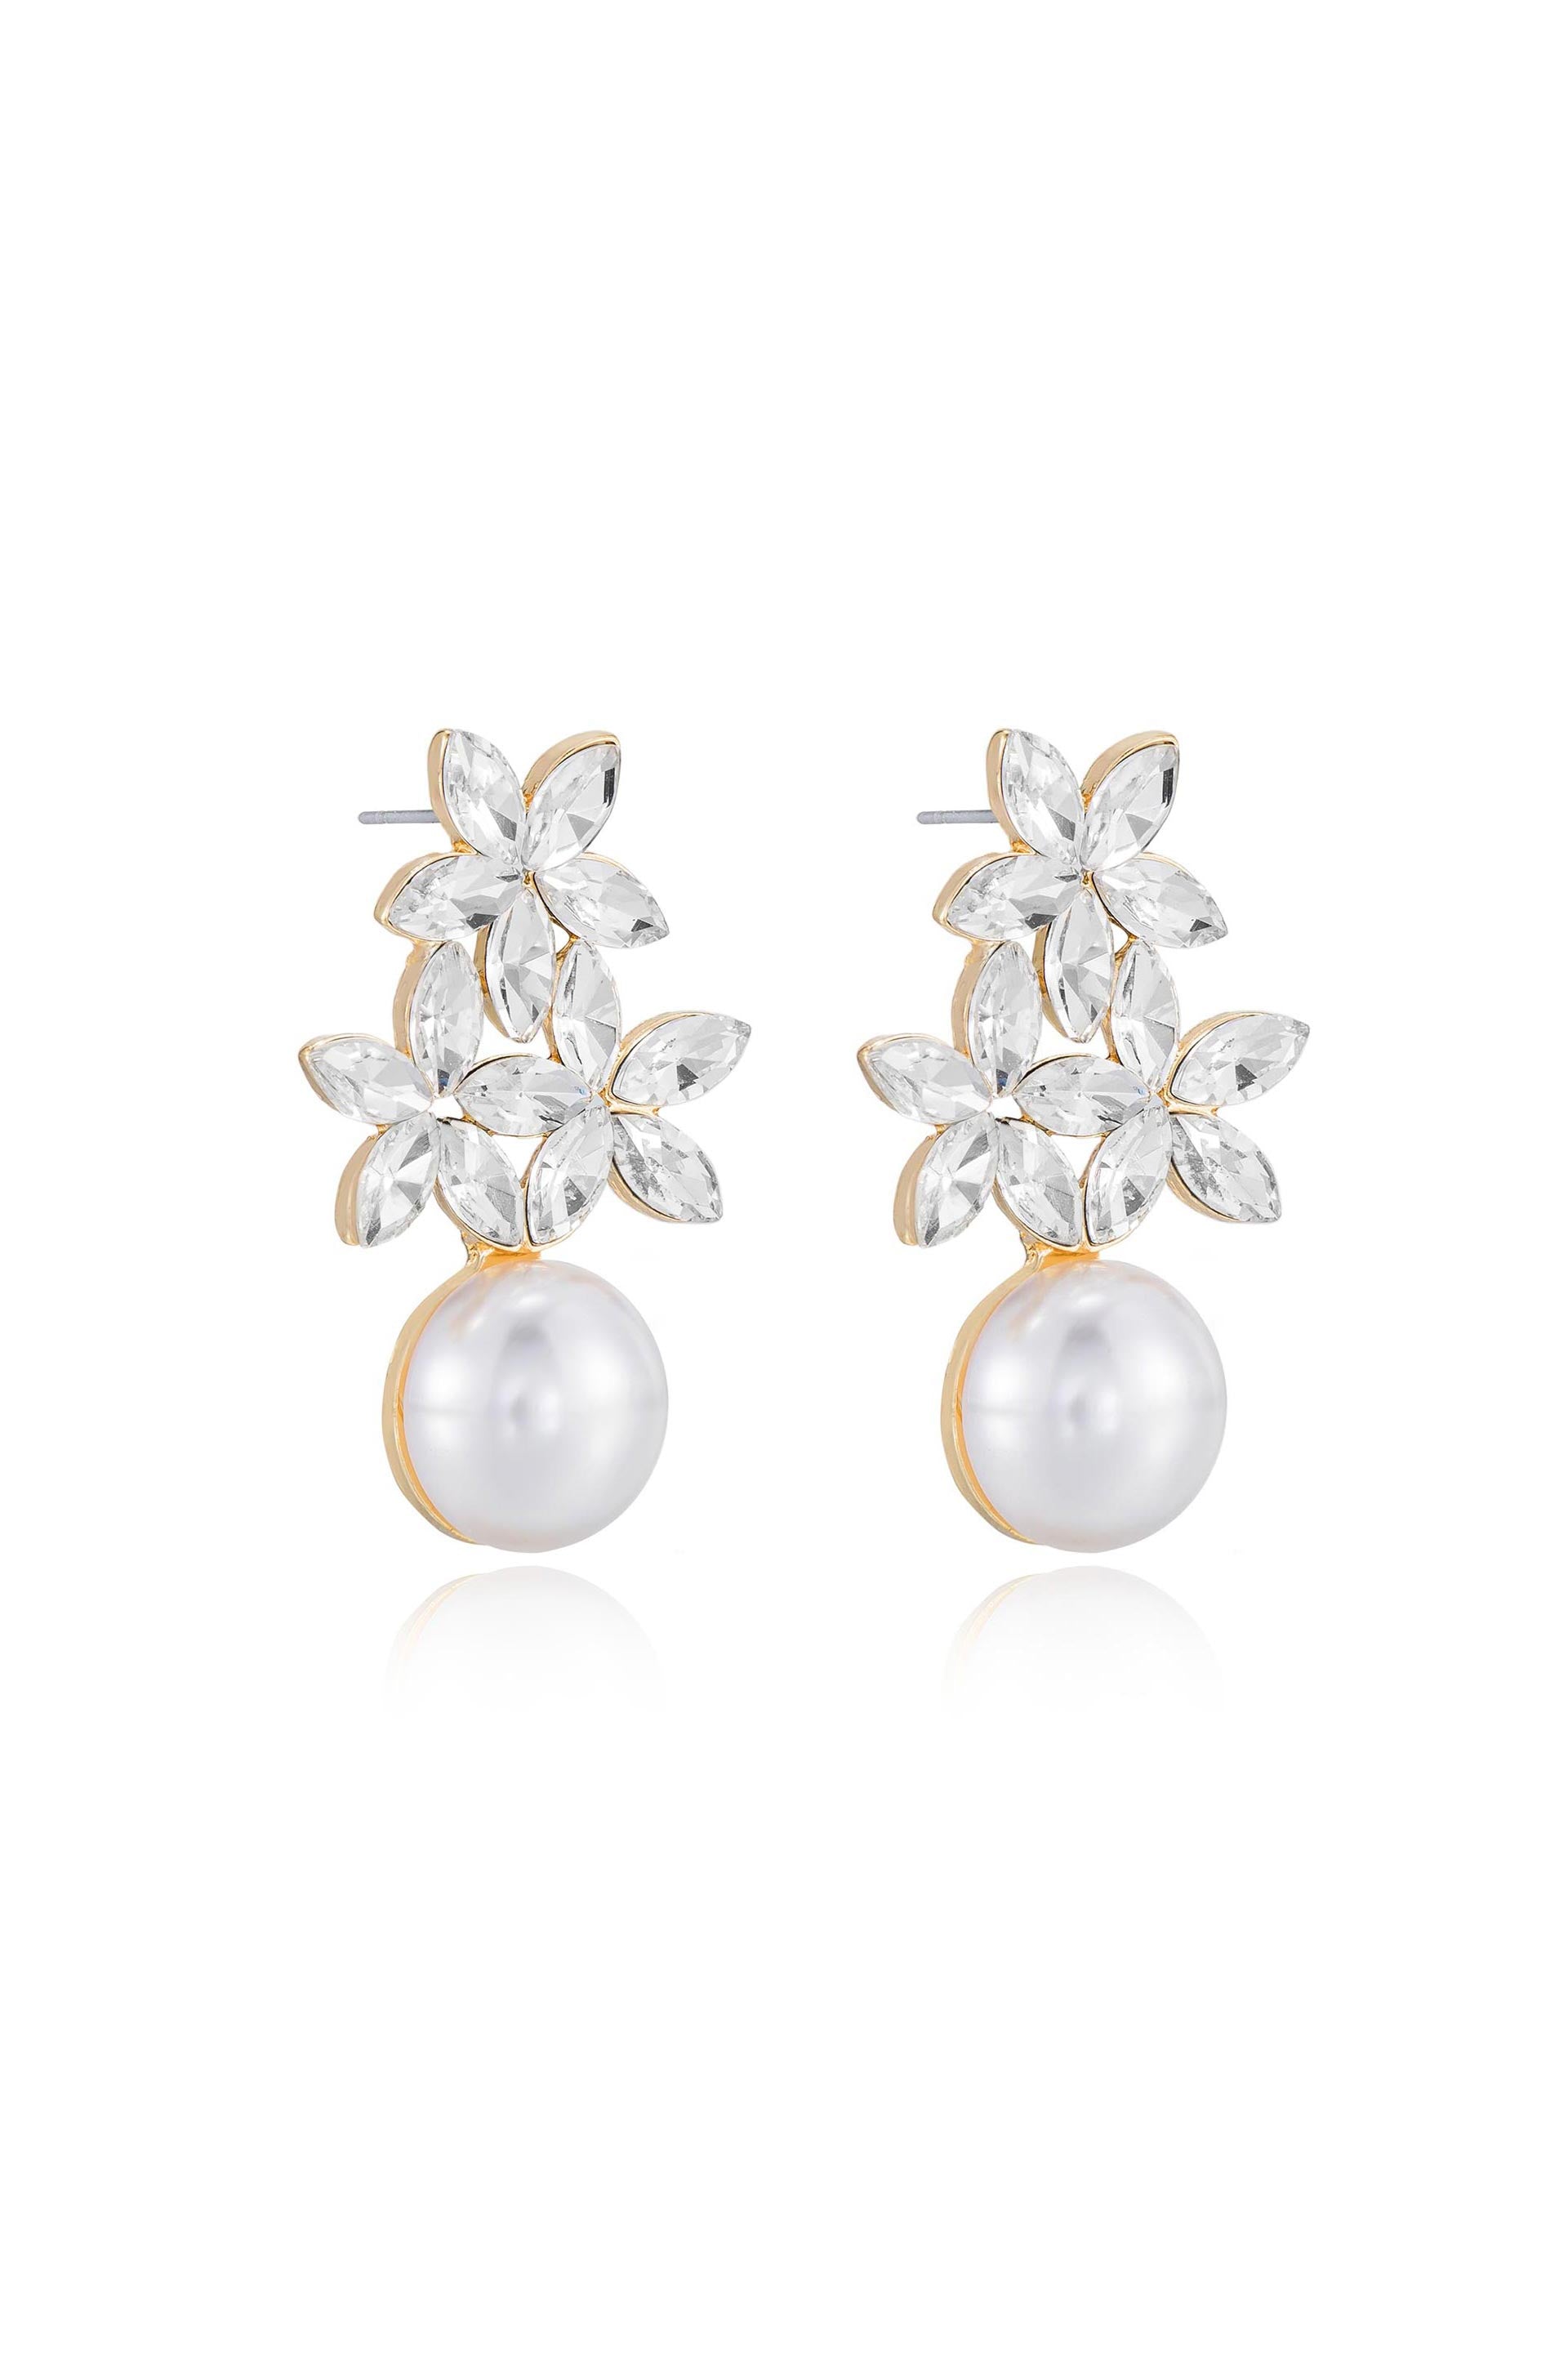 Stunning Party Wear Earrings for Women - Find Your Perfect Pair